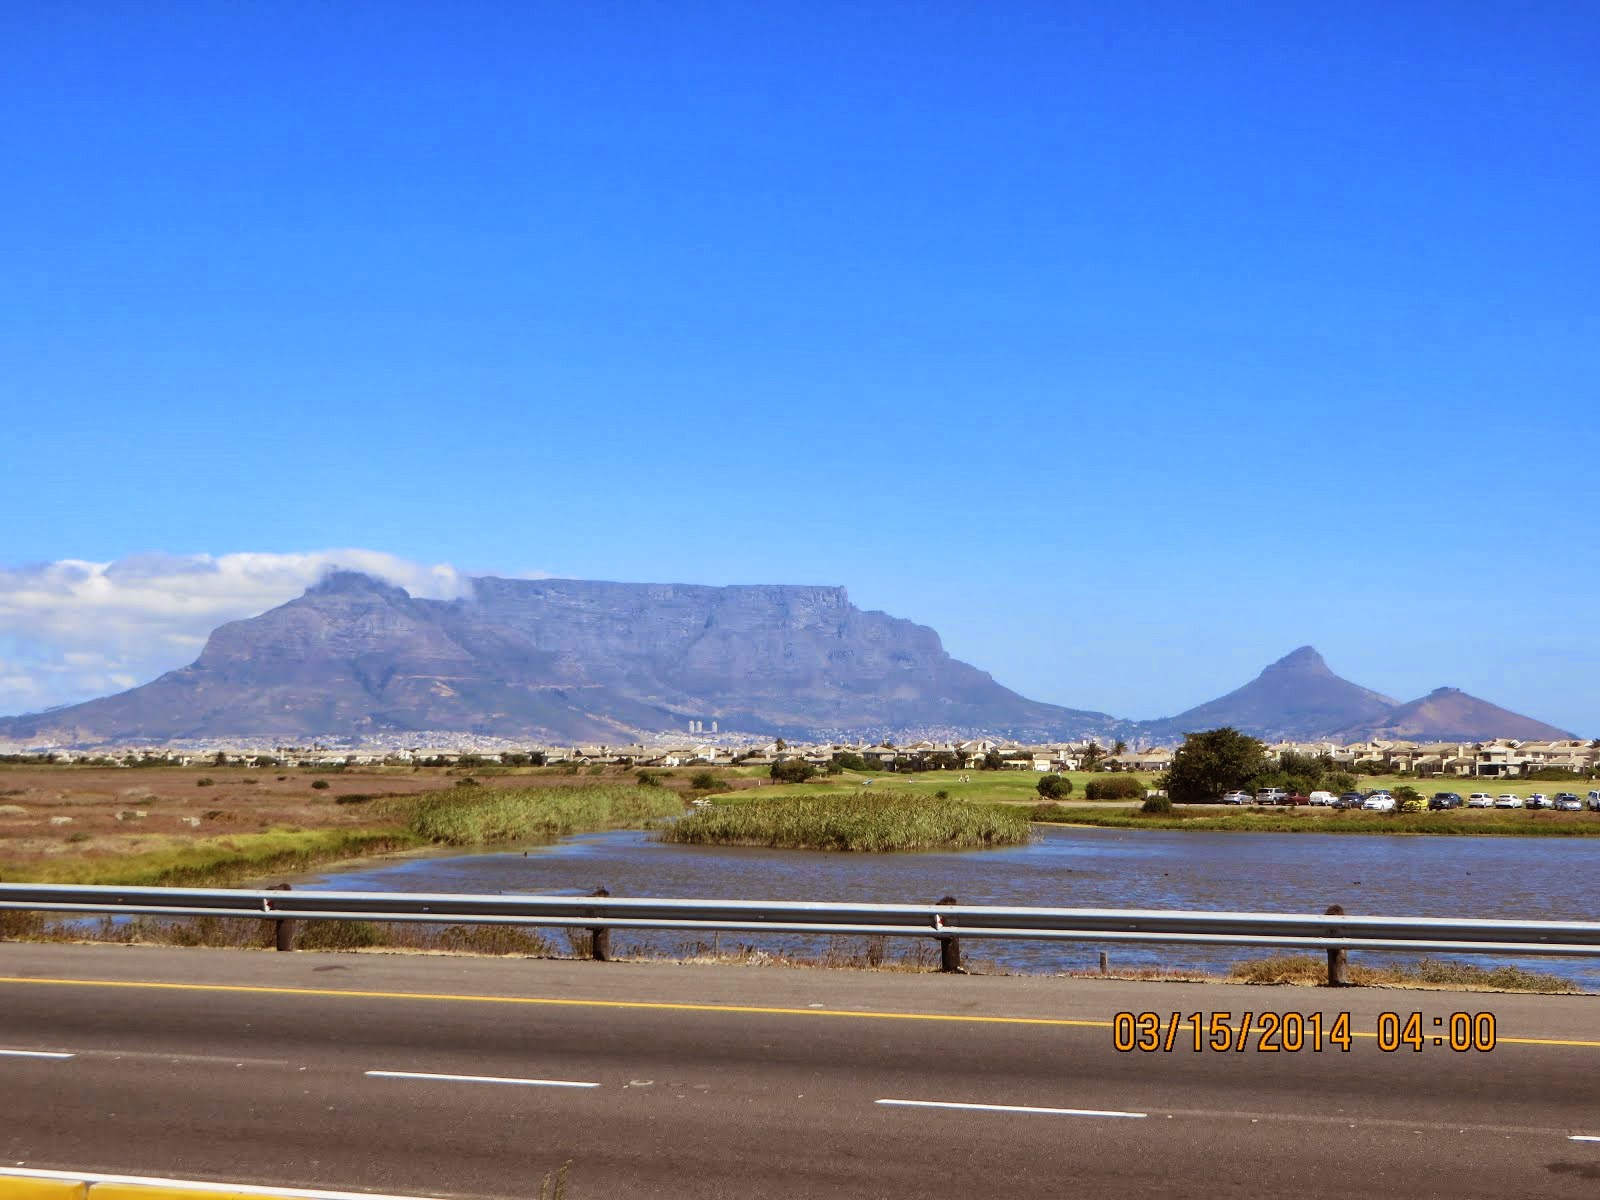 Table Mountain, the famous backdrop for Capetown